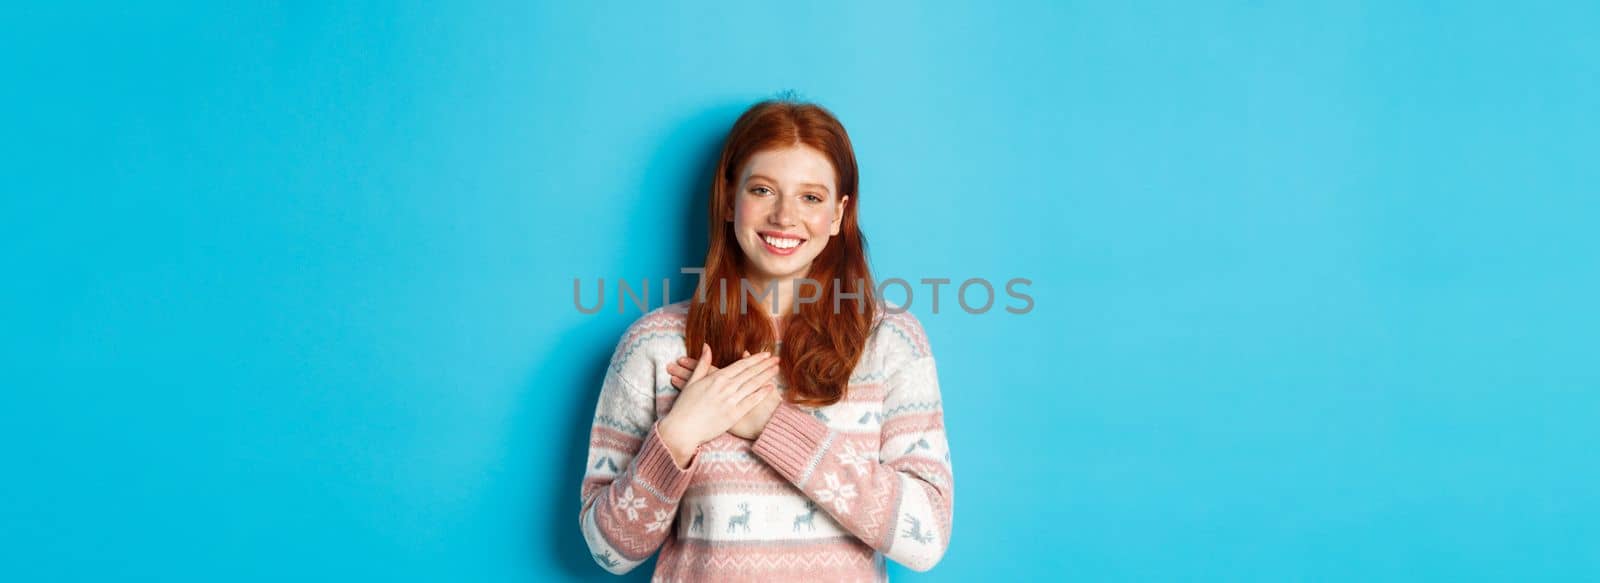 Image of beautiful redhead female model holding hands on heart and smiling, saying thank you, being grateful, standing over blue background.